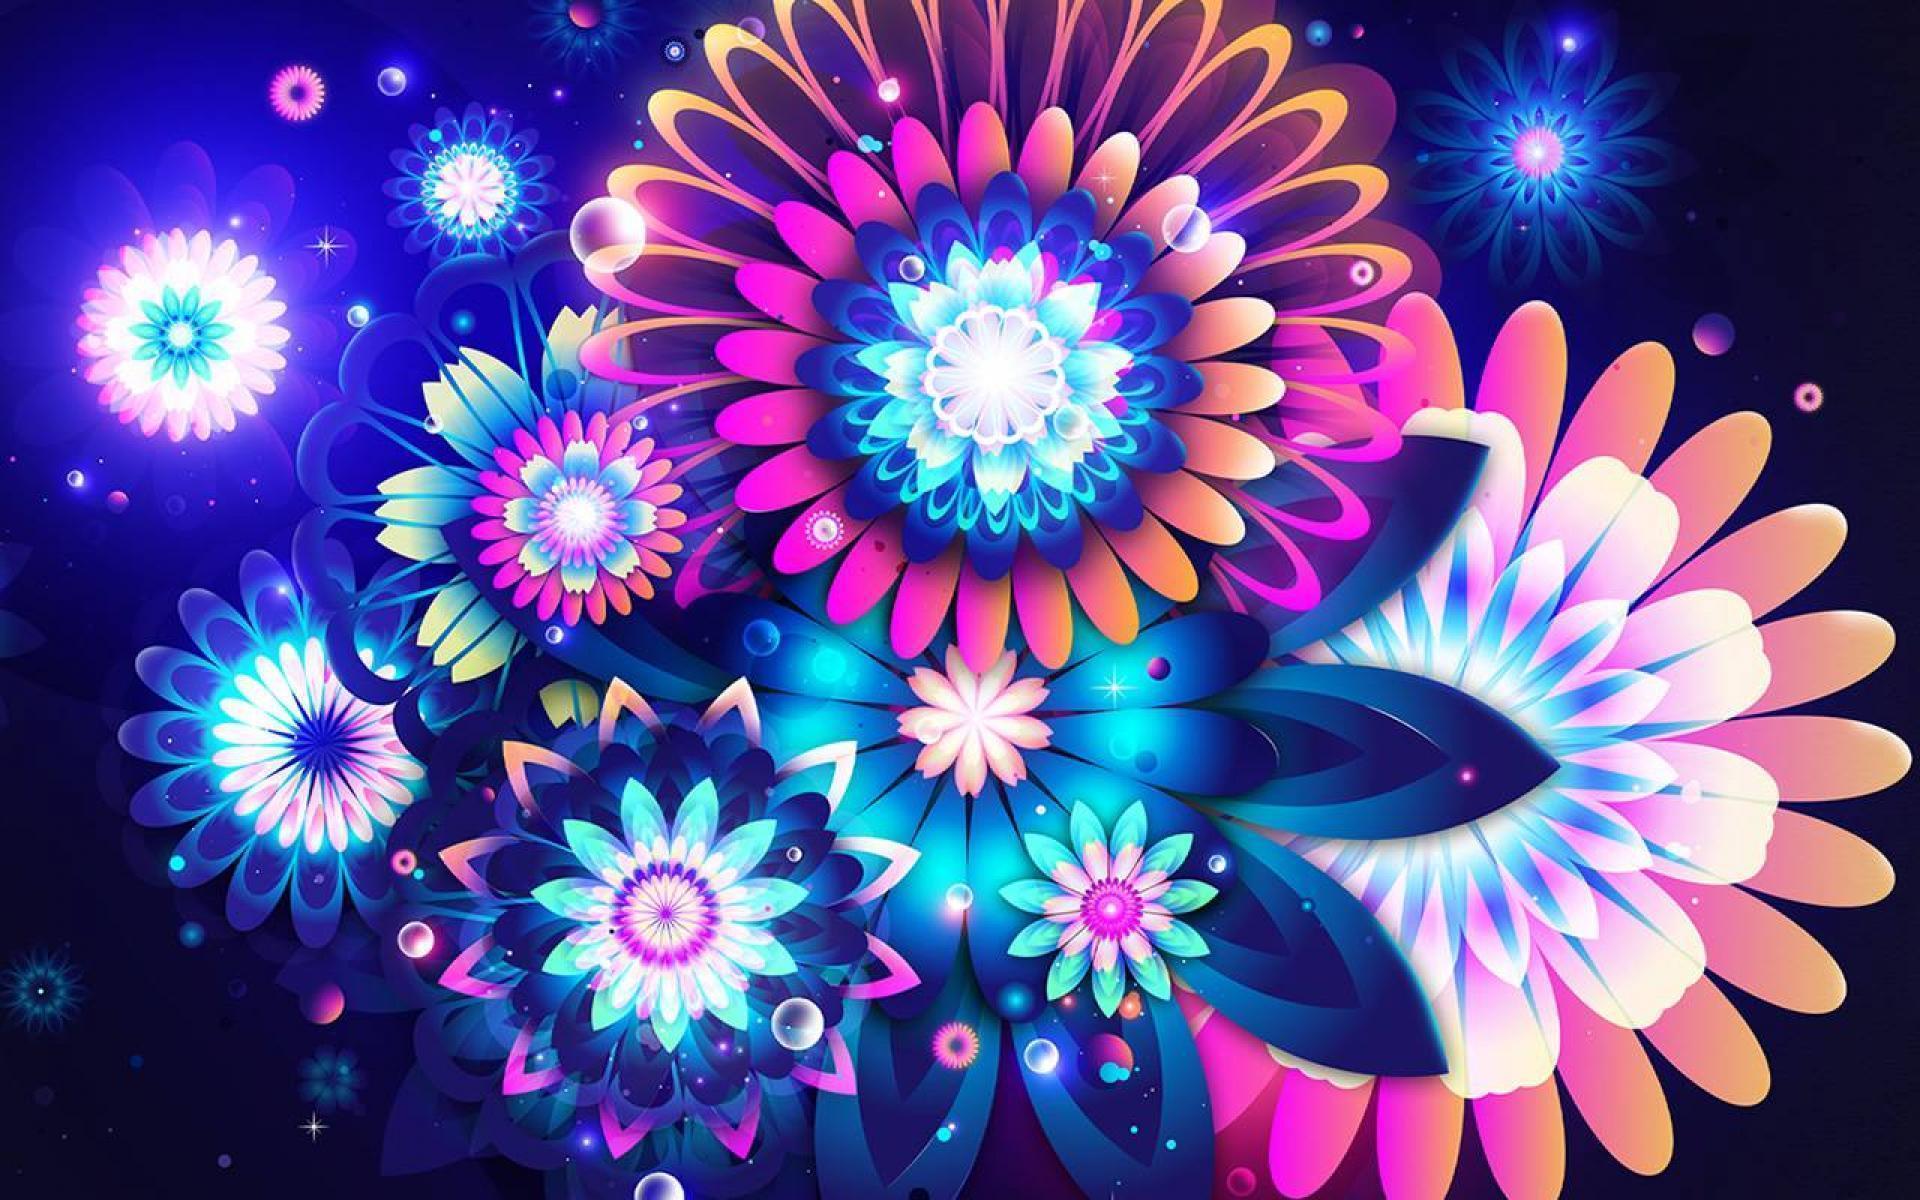 Colorful Wallpapers Designs - Wallpaper Cave